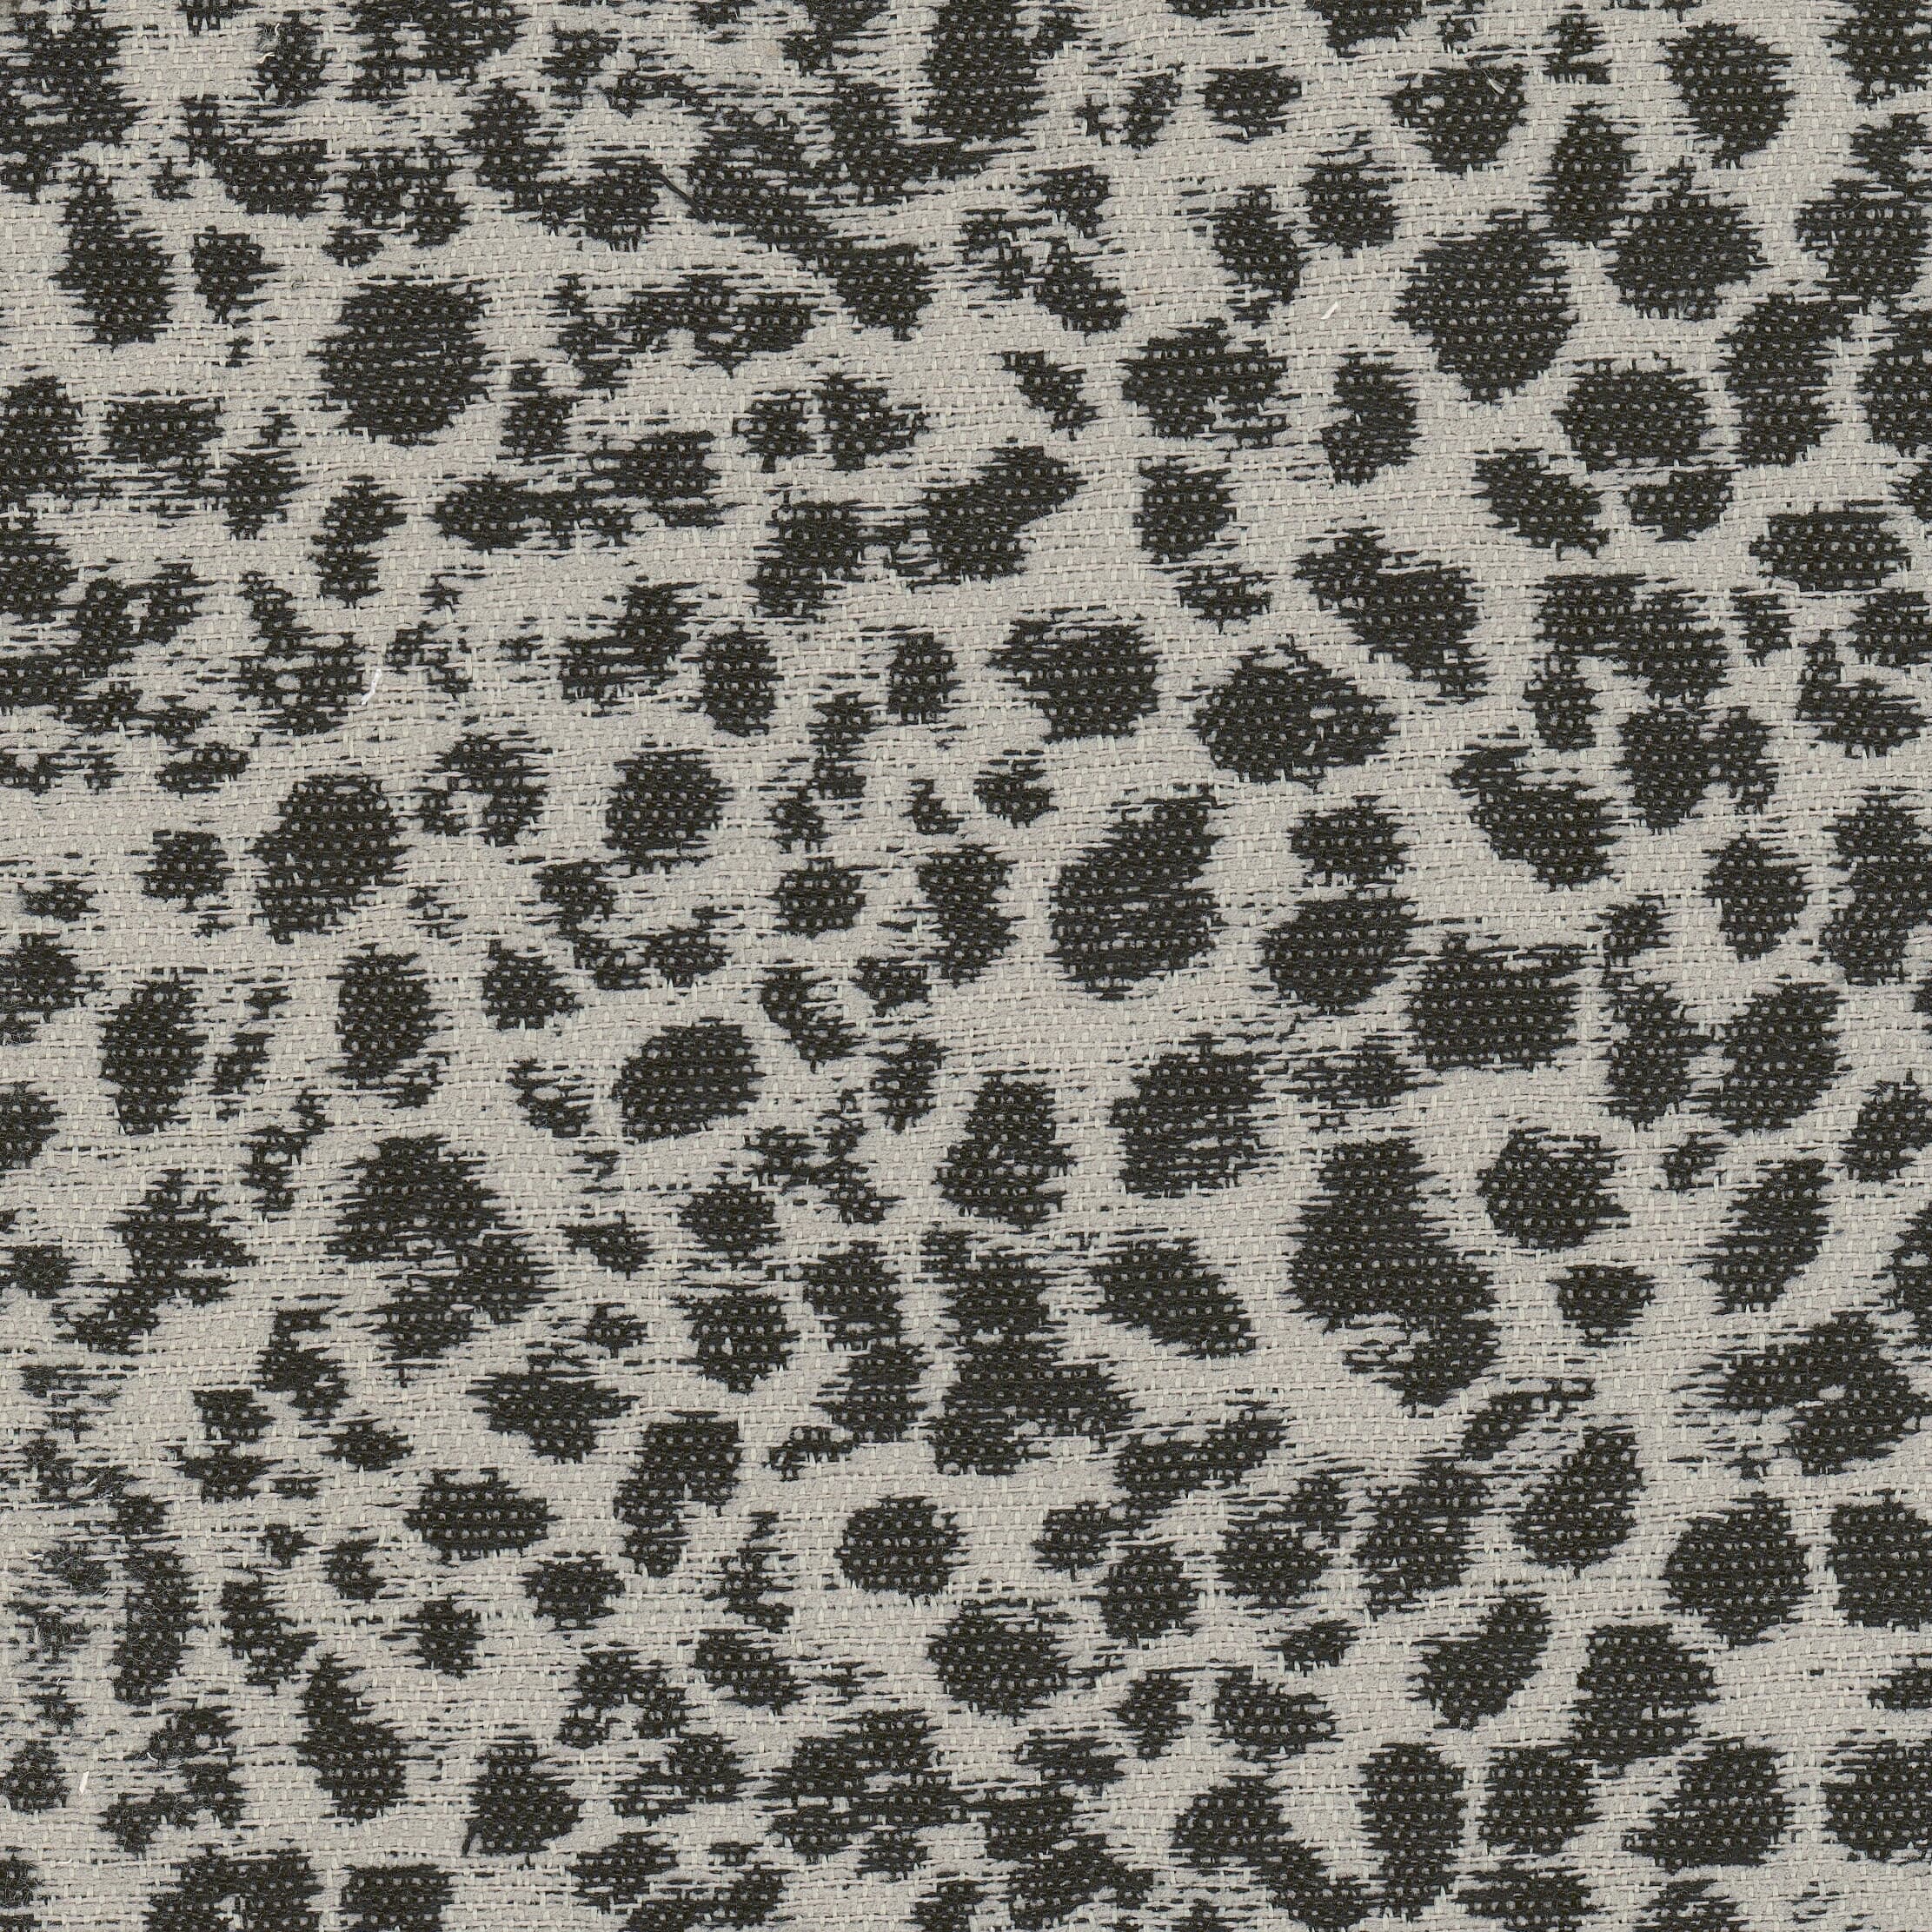 Dalmation 4 Black/camel by Stout Fabric